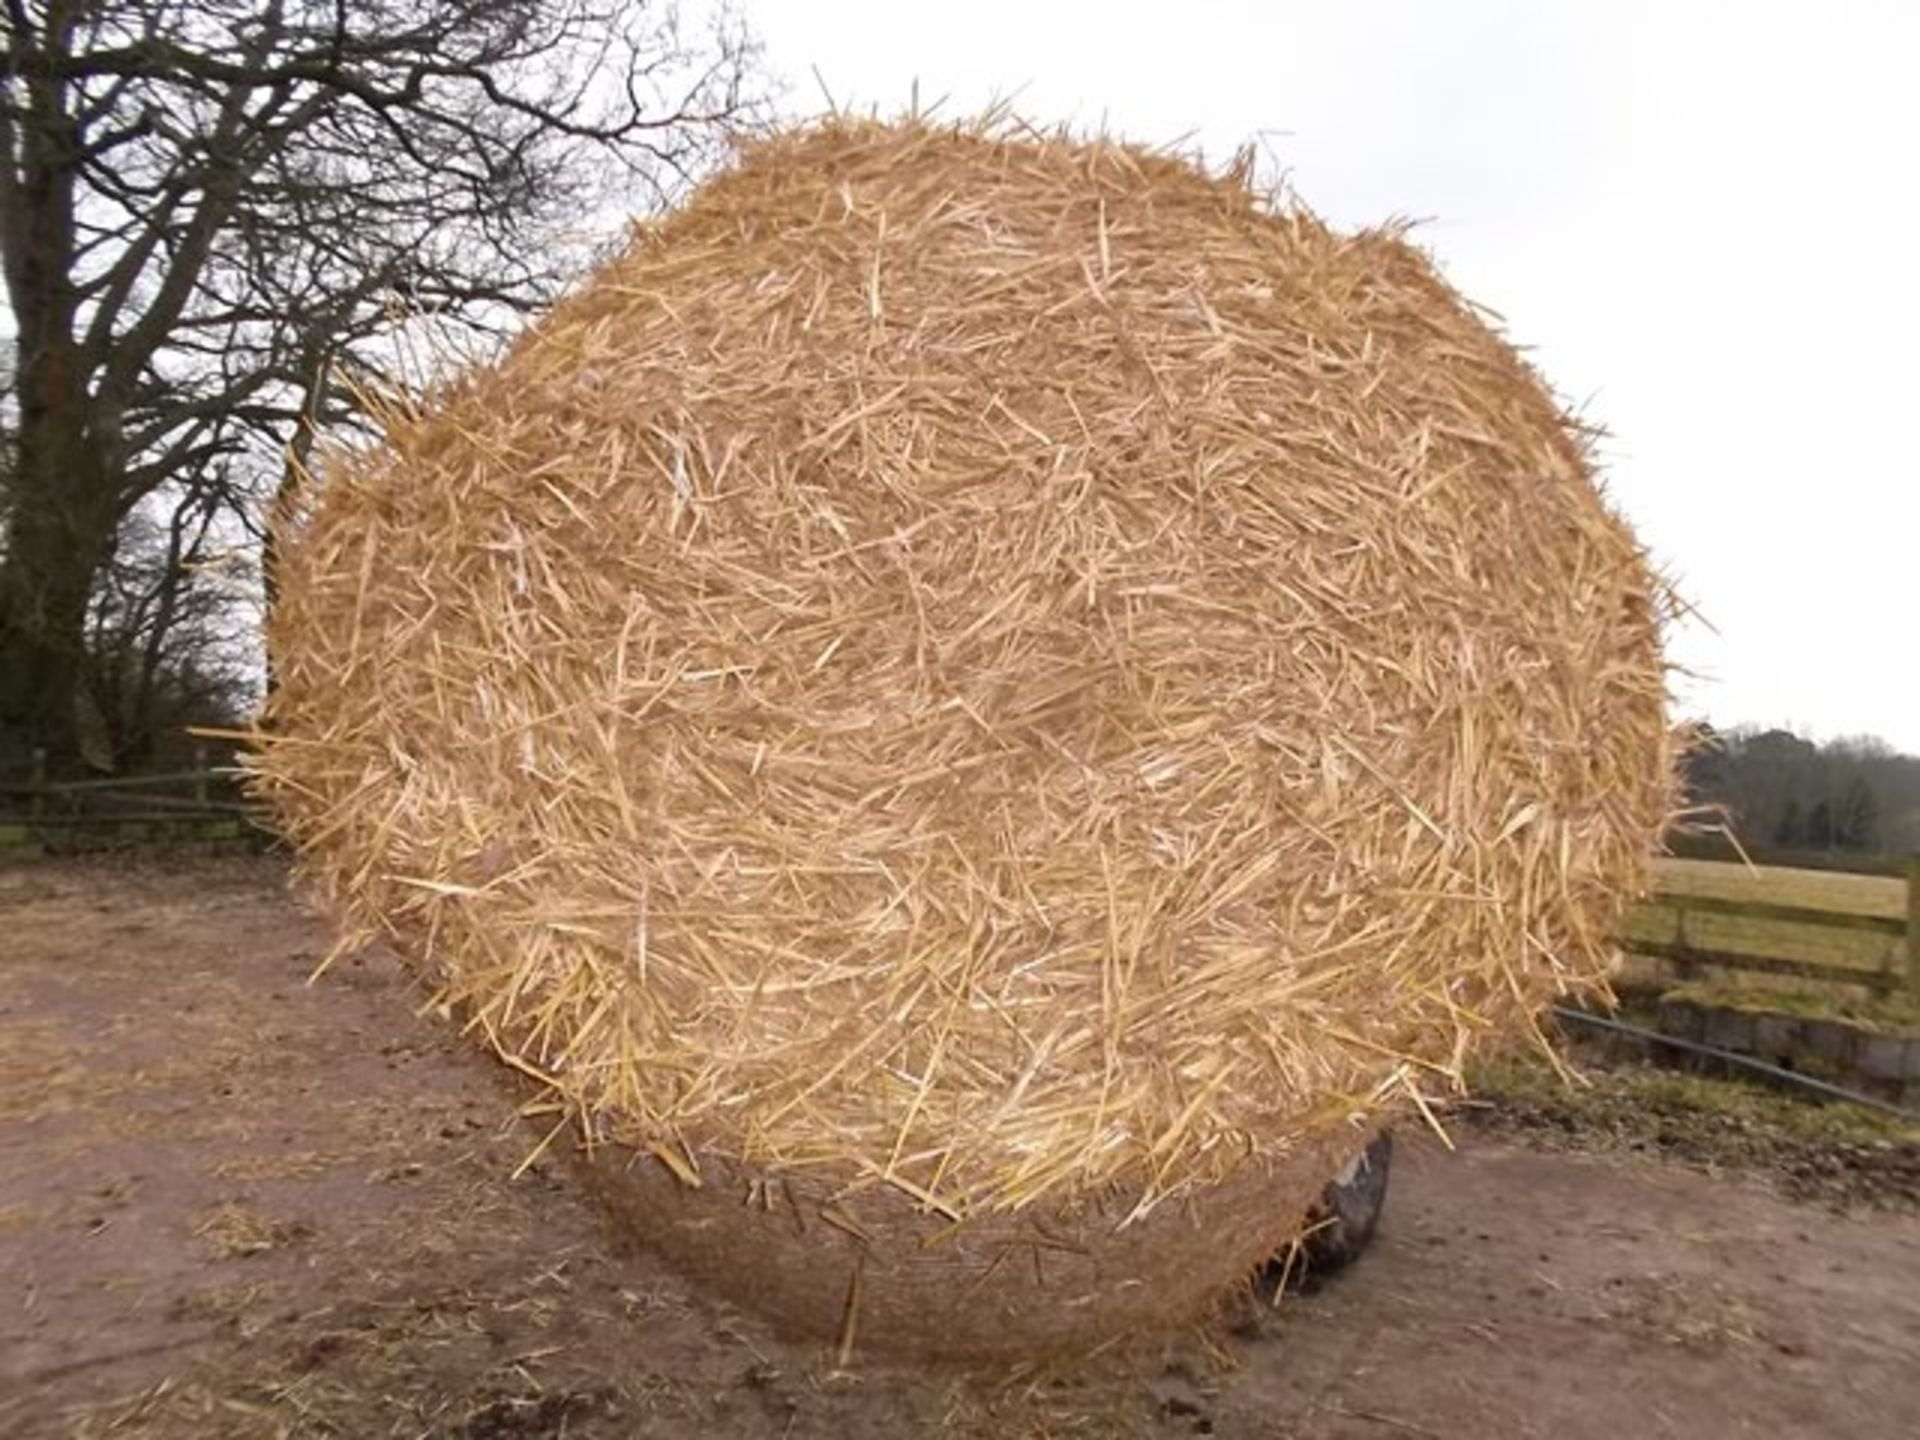 10 x 2014 harvest round bales of wheat straw. Location: Hampshire. Viewing & collection: by... - Image 2 of 3